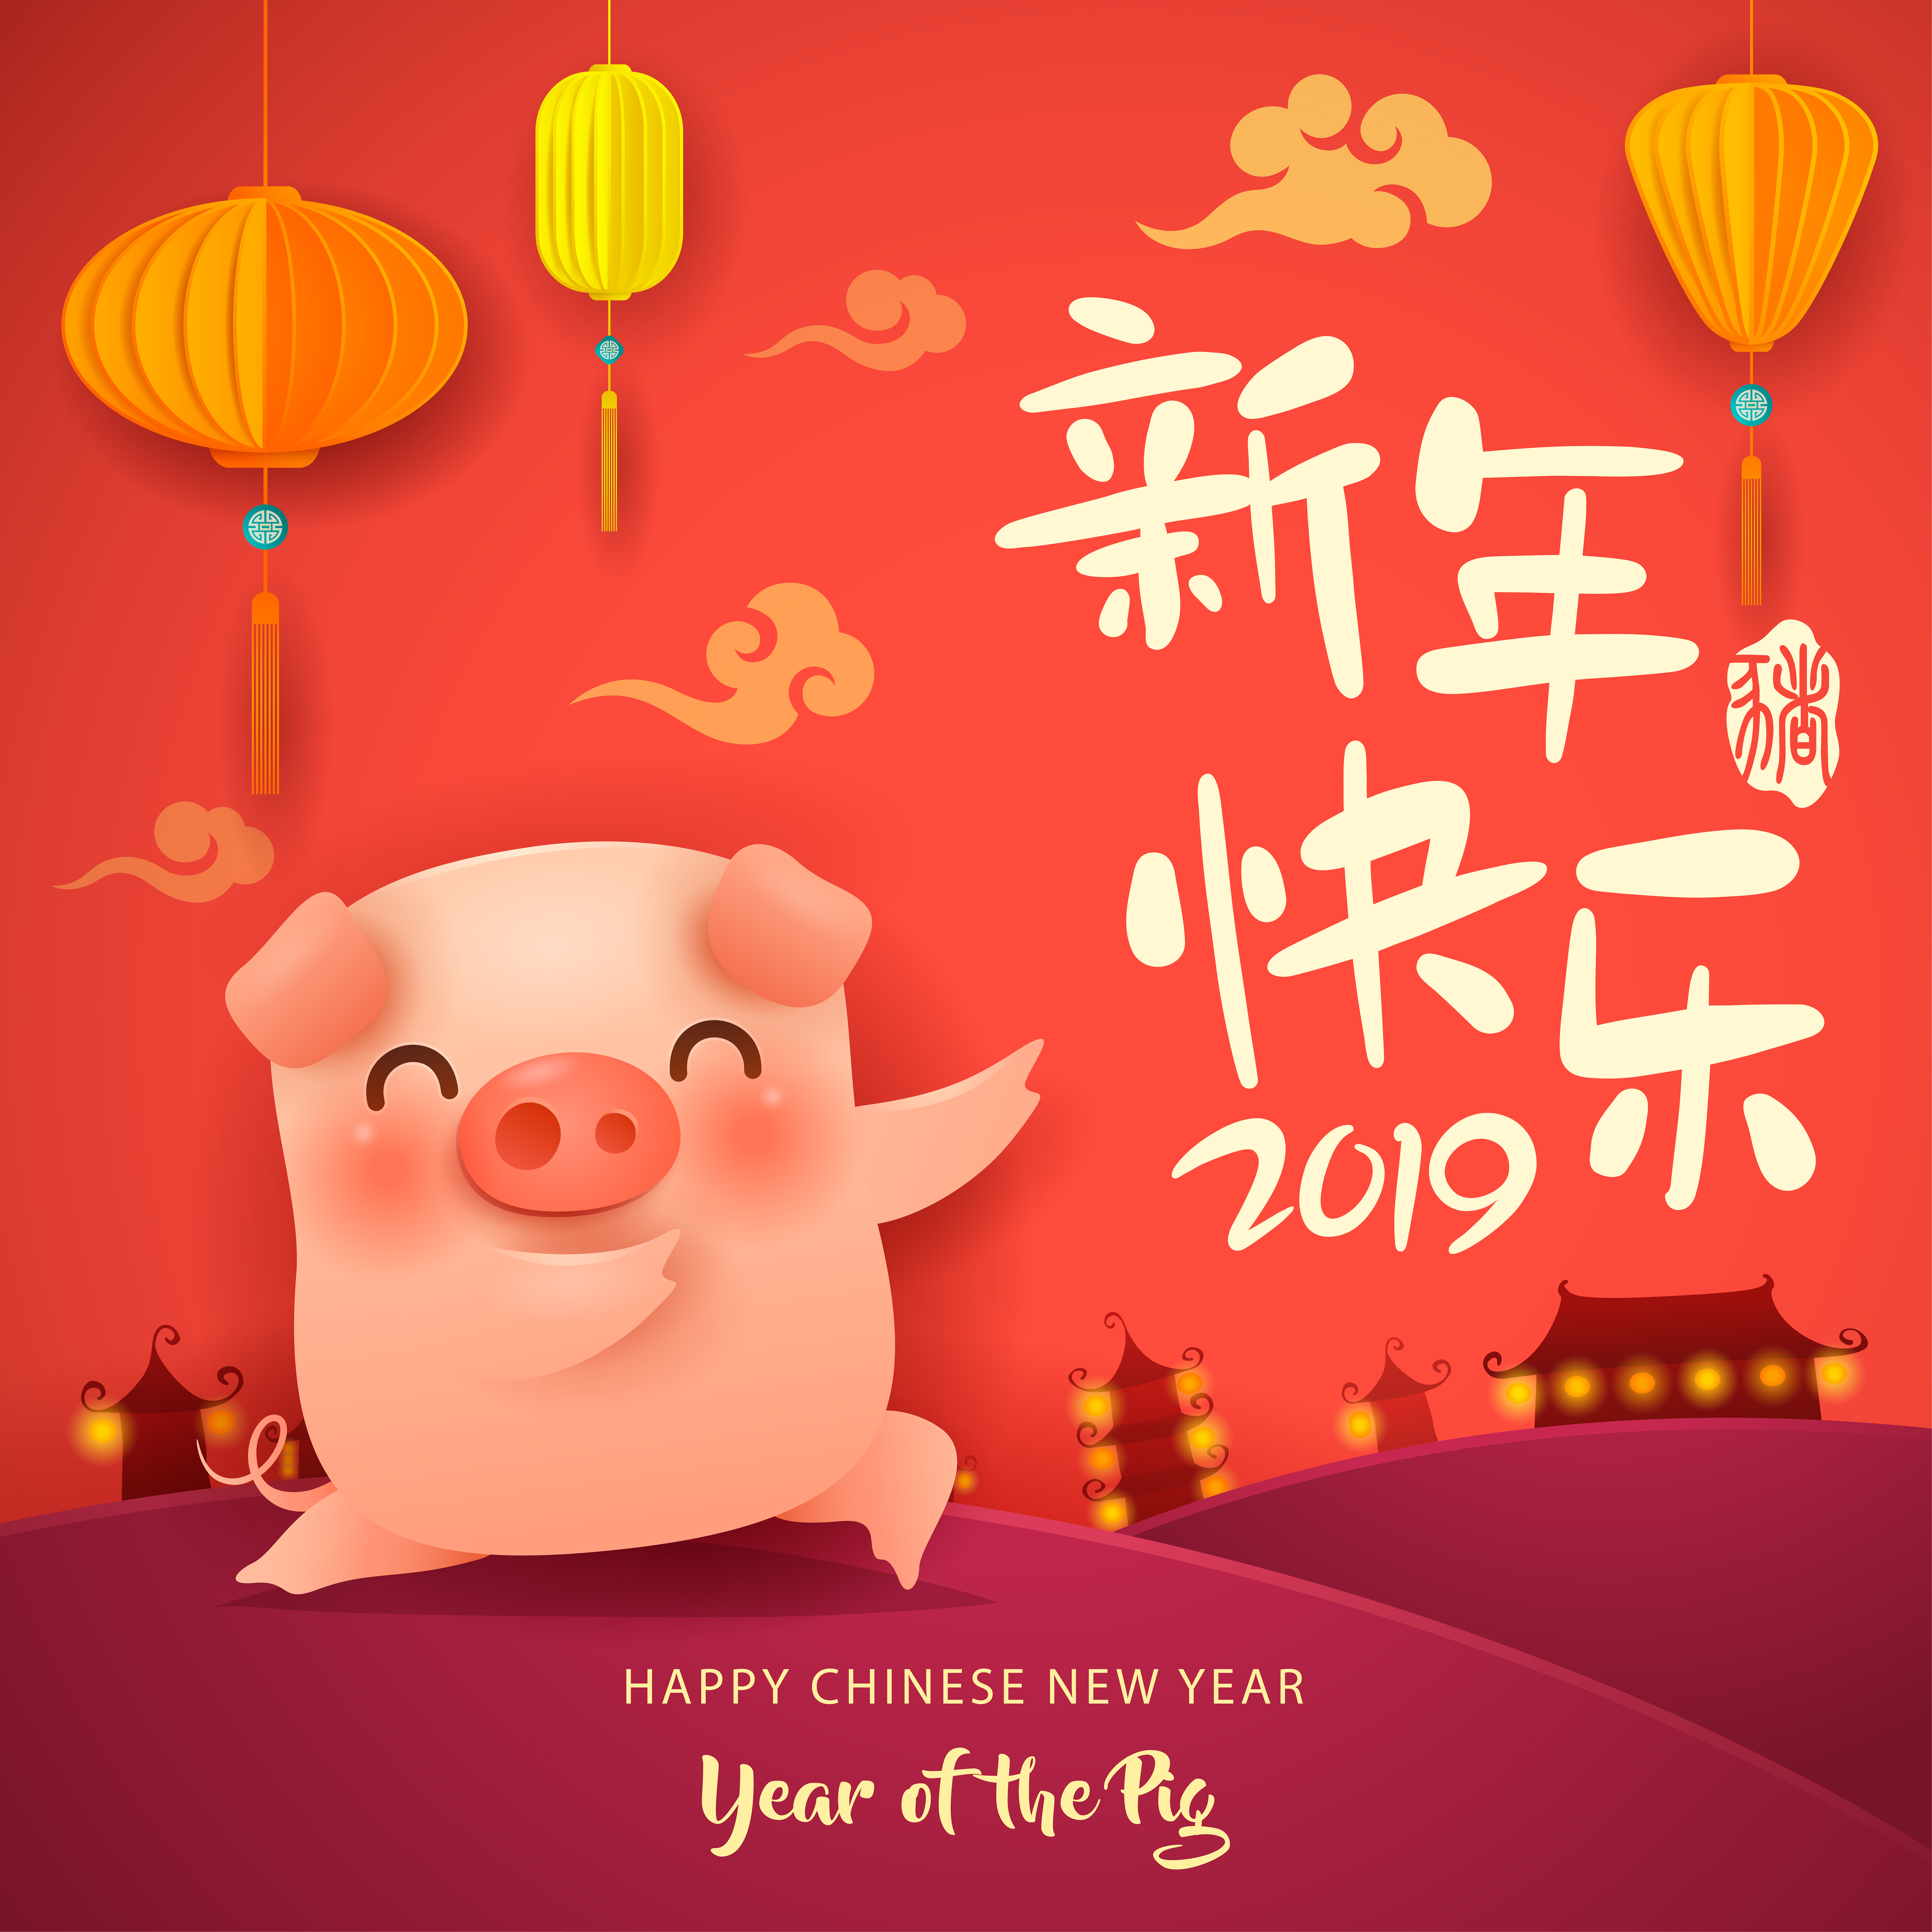 Chinese New Year The year of the pig - Download Free ...